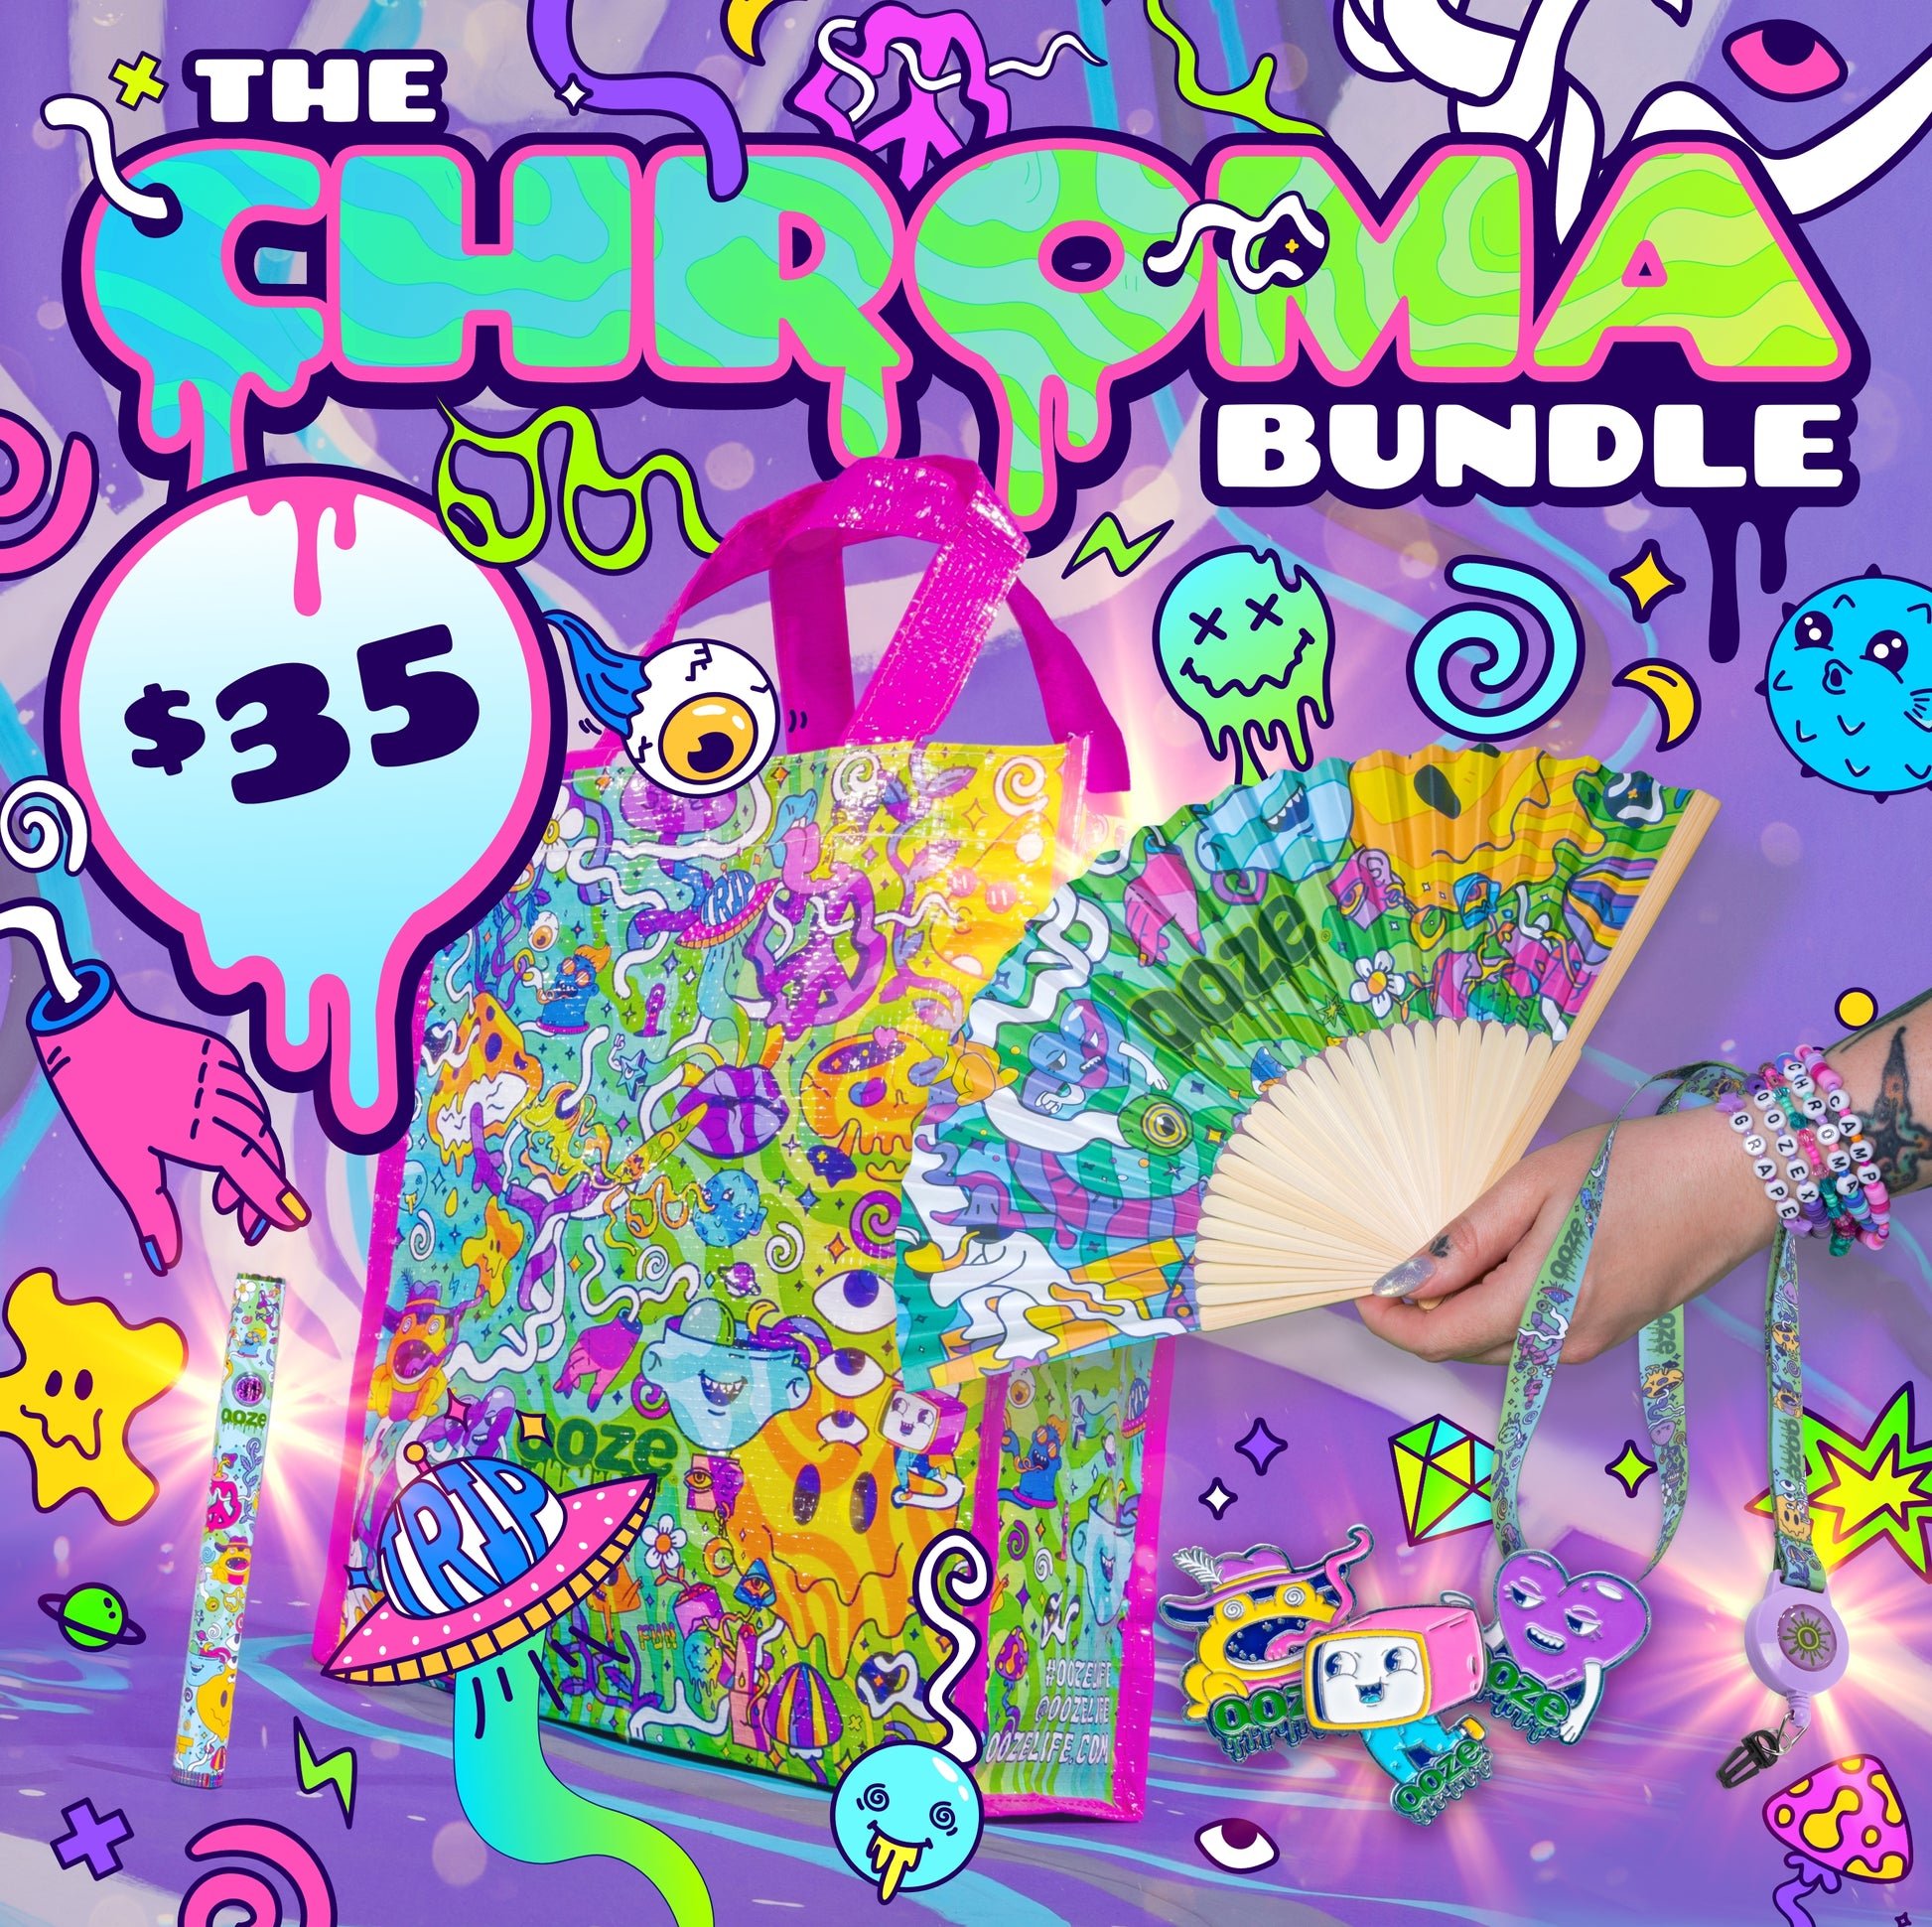 The Ooze Chroma Bundle graphic shows the reusable bag, Chroma Twist Slim Pen 2.0, paper fan, lanyard, and 3 enamel pins with a $35 price bubble